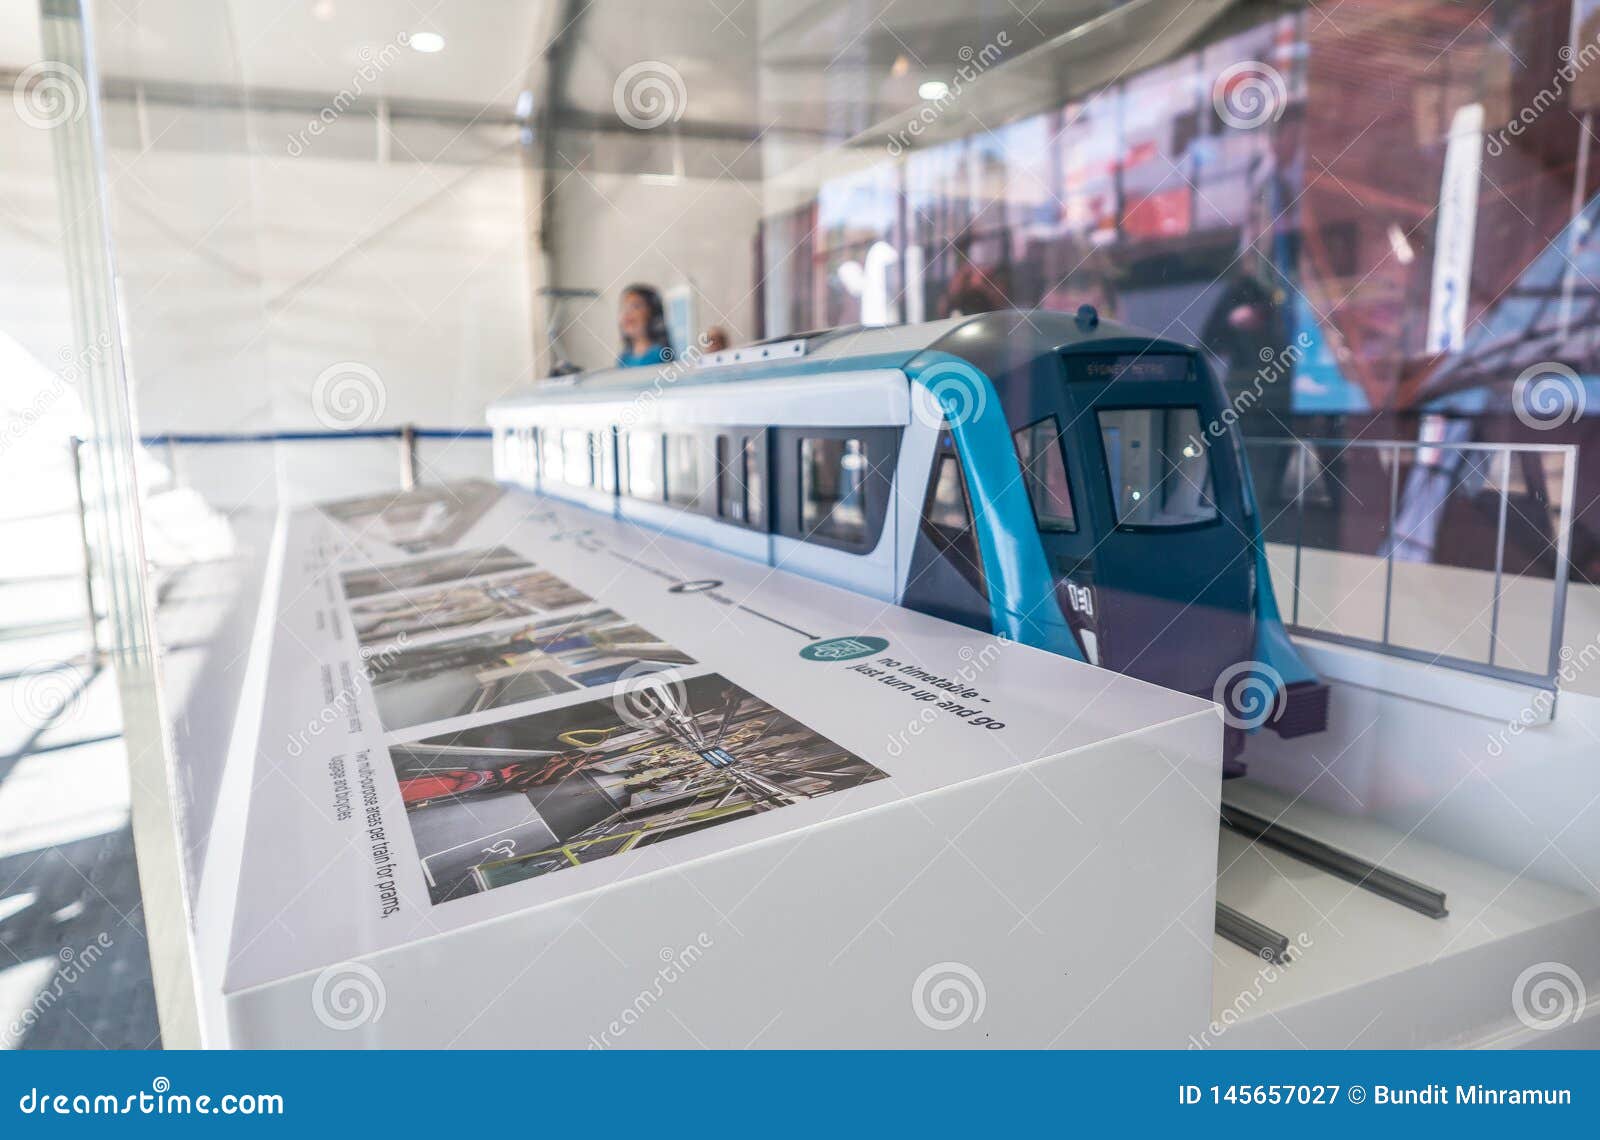 The Train`s Model of Sydney Metro is Australiaâ€™s Biggest Public Transport  Project. New Metro Rail Will Services Start in 2019. Editorial Photography  - Image of passenger, metro: 145657027